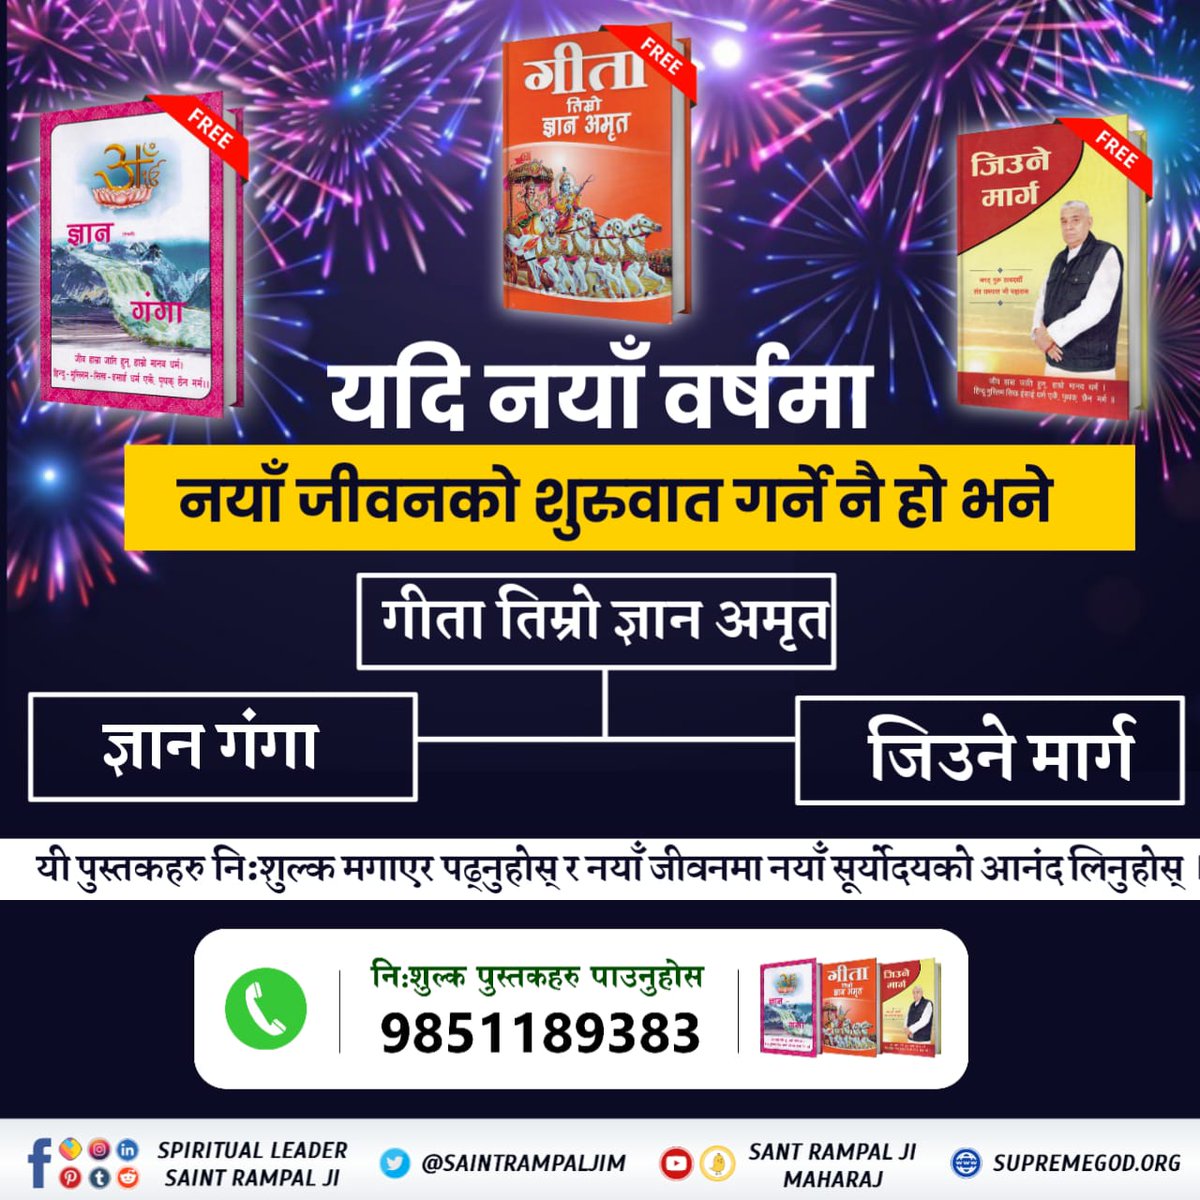 #नयाँवर्षमा_जीवनको_नयाँयात्रा
New knowledge' in the New Year.
How to get complete rid of the pain of birth and death?
To know this, must read the precious book 'Way of Living'.